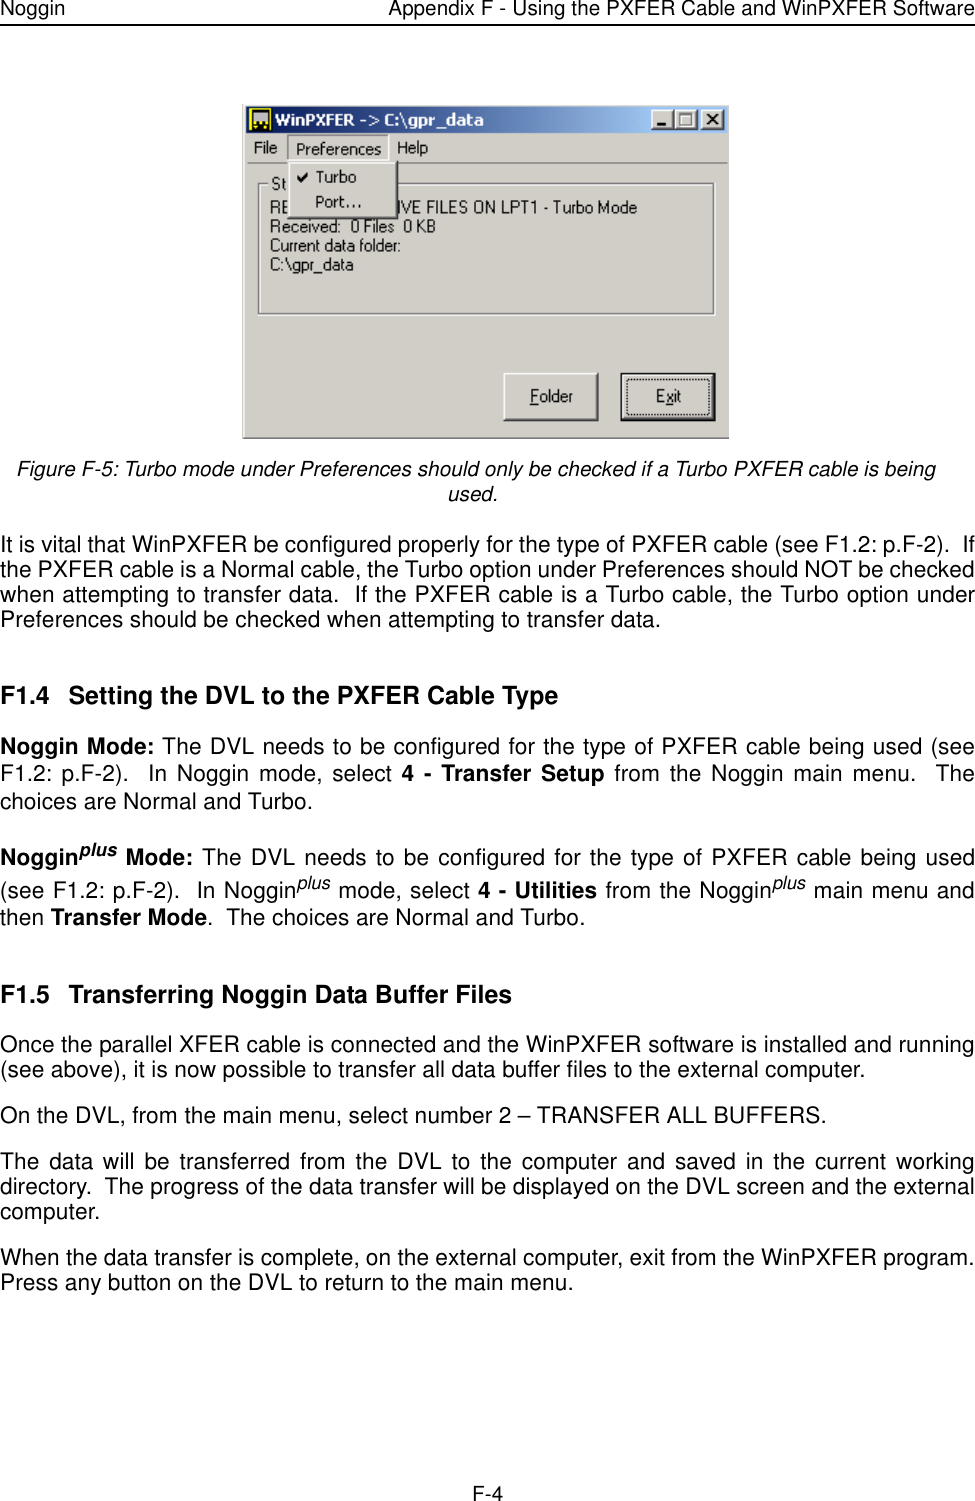 Noggin Appendix F - Using the PXFER Cable and WinPXFER SoftwareF-4 Figure F-5: Turbo mode under Preferences should only be checked if a Turbo PXFER cable is being used.It is vital that WinPXFER be configured properly for the type of PXFER cable (see F1.2: p.F-2).  Ifthe PXFER cable is a Normal cable, the Turbo option under Preferences should NOT be checkedwhen attempting to transfer data.  If the PXFER cable is a Turbo cable, the Turbo option underPreferences should be checked when attempting to transfer data.   F1.4 Setting the DVL to the PXFER Cable TypeNoggin Mode: The DVL needs to be configured for the type of PXFER cable being used (seeF1.2: p.F-2).  In Noggin mode, select 4 - Transfer Setup from the Noggin main menu.  Thechoices are Normal and Turbo.Nogginplus Mode: The DVL needs to be configured for the type of PXFER cable being used(see F1.2: p.F-2).  In Nogginplus mode, select 4 - Utilities from the Nogginplus main menu andthen Transfer Mode.  The choices are Normal and Turbo.F1.5 Transferring Noggin Data Buffer FilesOnce the parallel XFER cable is connected and the WinPXFER software is installed and running(see above), it is now possible to transfer all data buffer files to the external computer.On the DVL, from the main menu, select number 2 – TRANSFER ALL BUFFERS.The data will be transferred from the DVL to the computer and saved in the current workingdirectory.  The progress of the data transfer will be displayed on the DVL screen and the externalcomputer.When the data transfer is complete, on the external computer, exit from the WinPXFER program.Press any button on the DVL to return to the main menu.